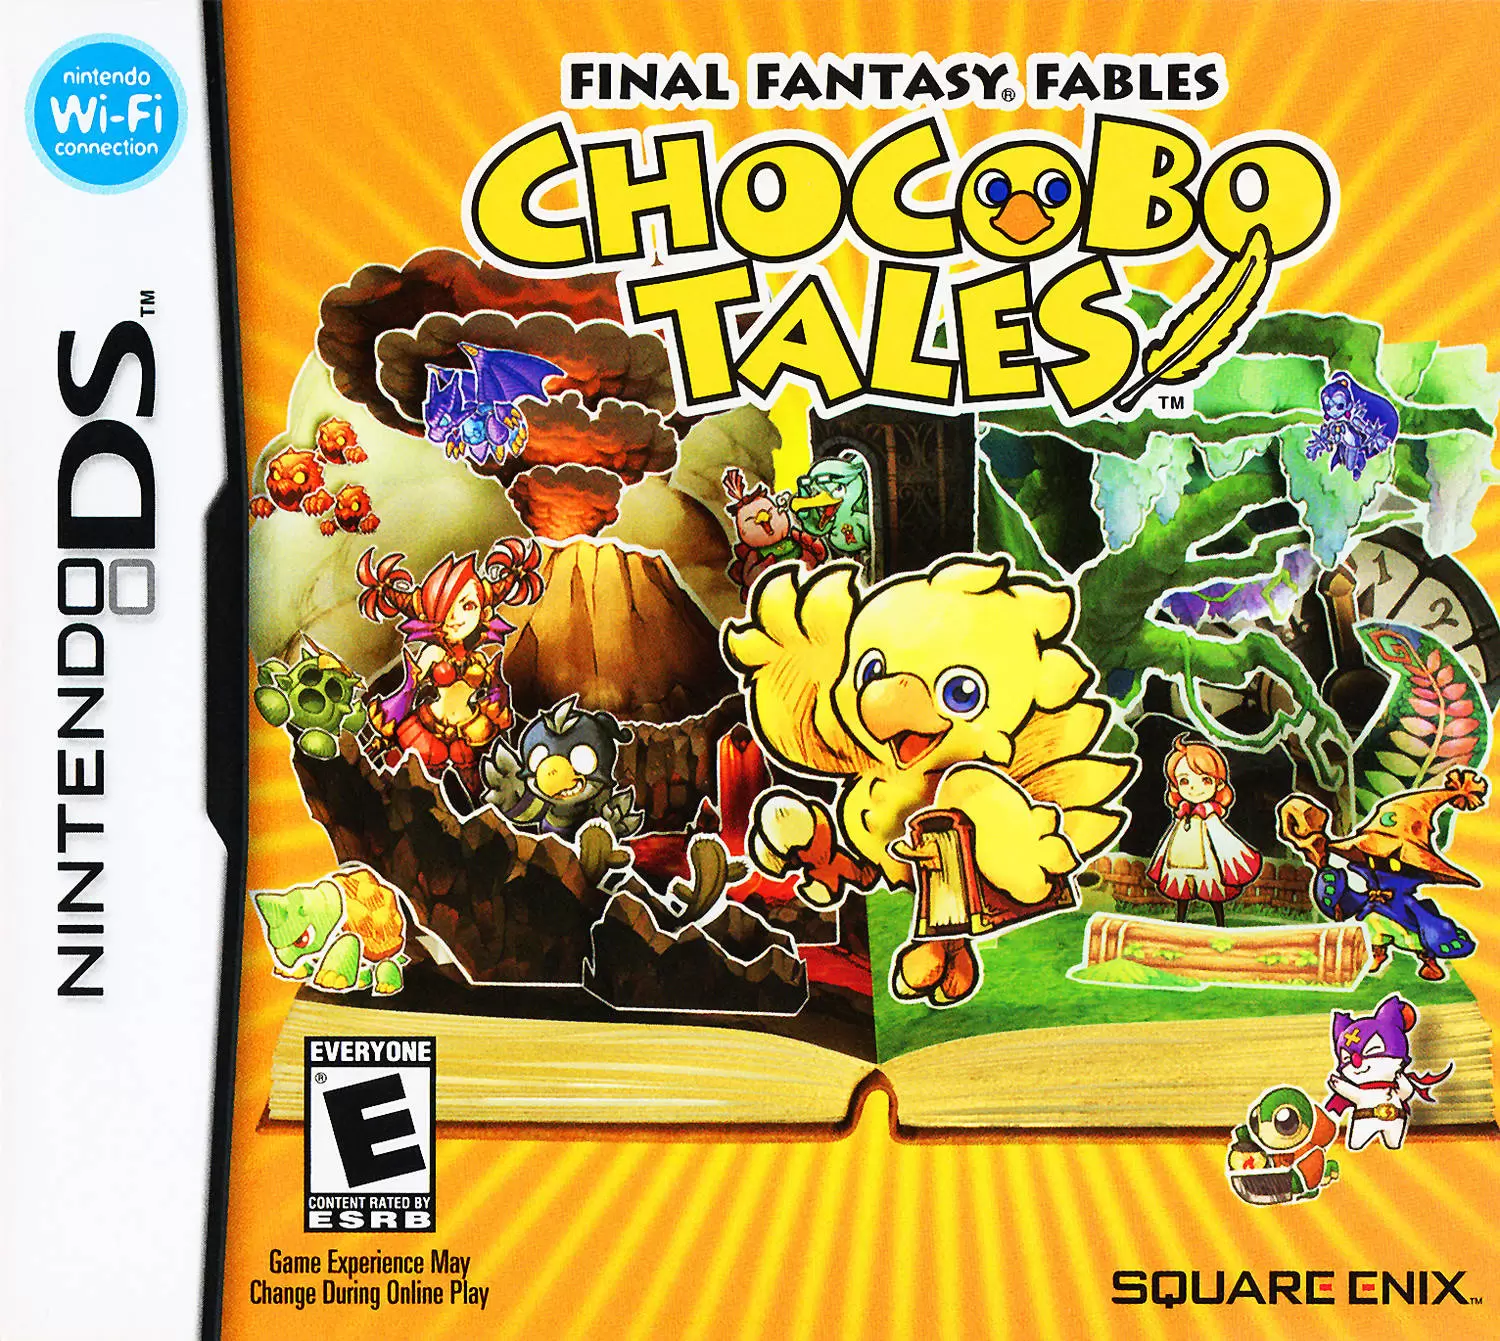 Nintendo DS Games - Final Fantasy Fables: Chocobo Tales